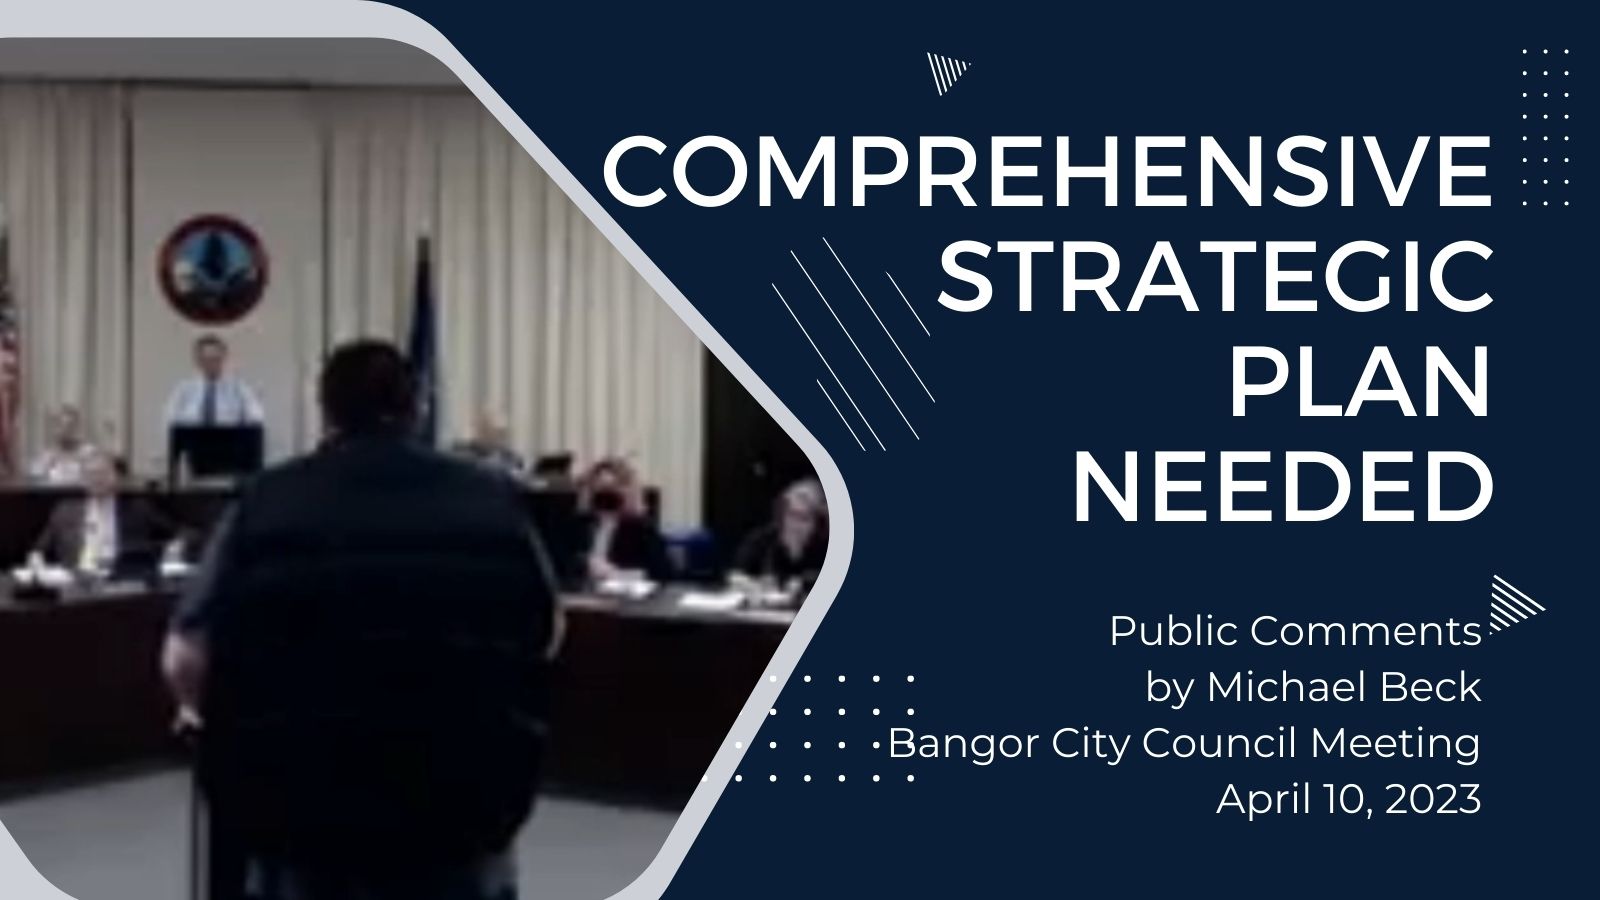 Thumbnail depicting Michael Beck speaking before the Bangor City Council, with the title "Comprehensive Strategic Plan Needed"